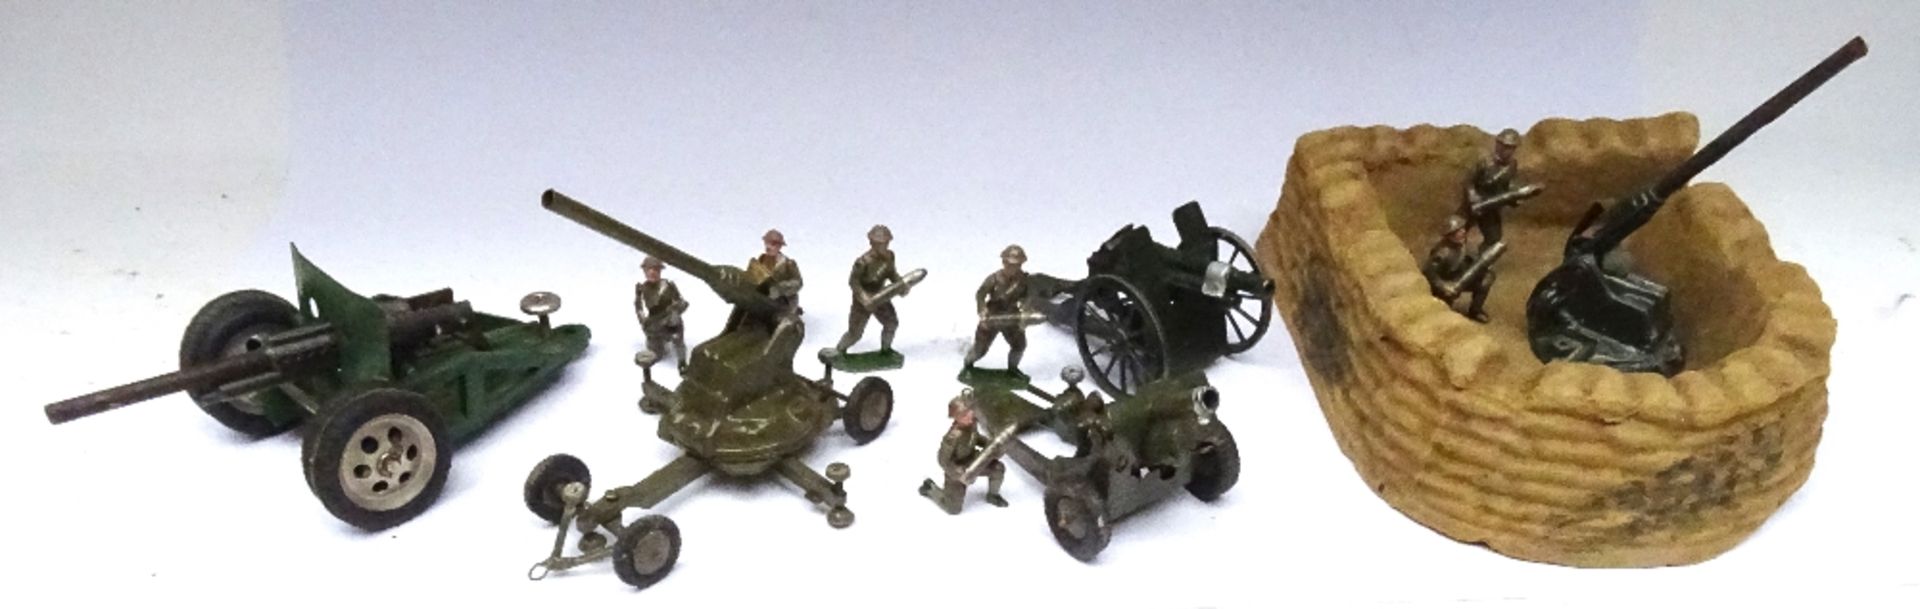 Britains set 1730, Gunners carrying Shells - Image 2 of 8